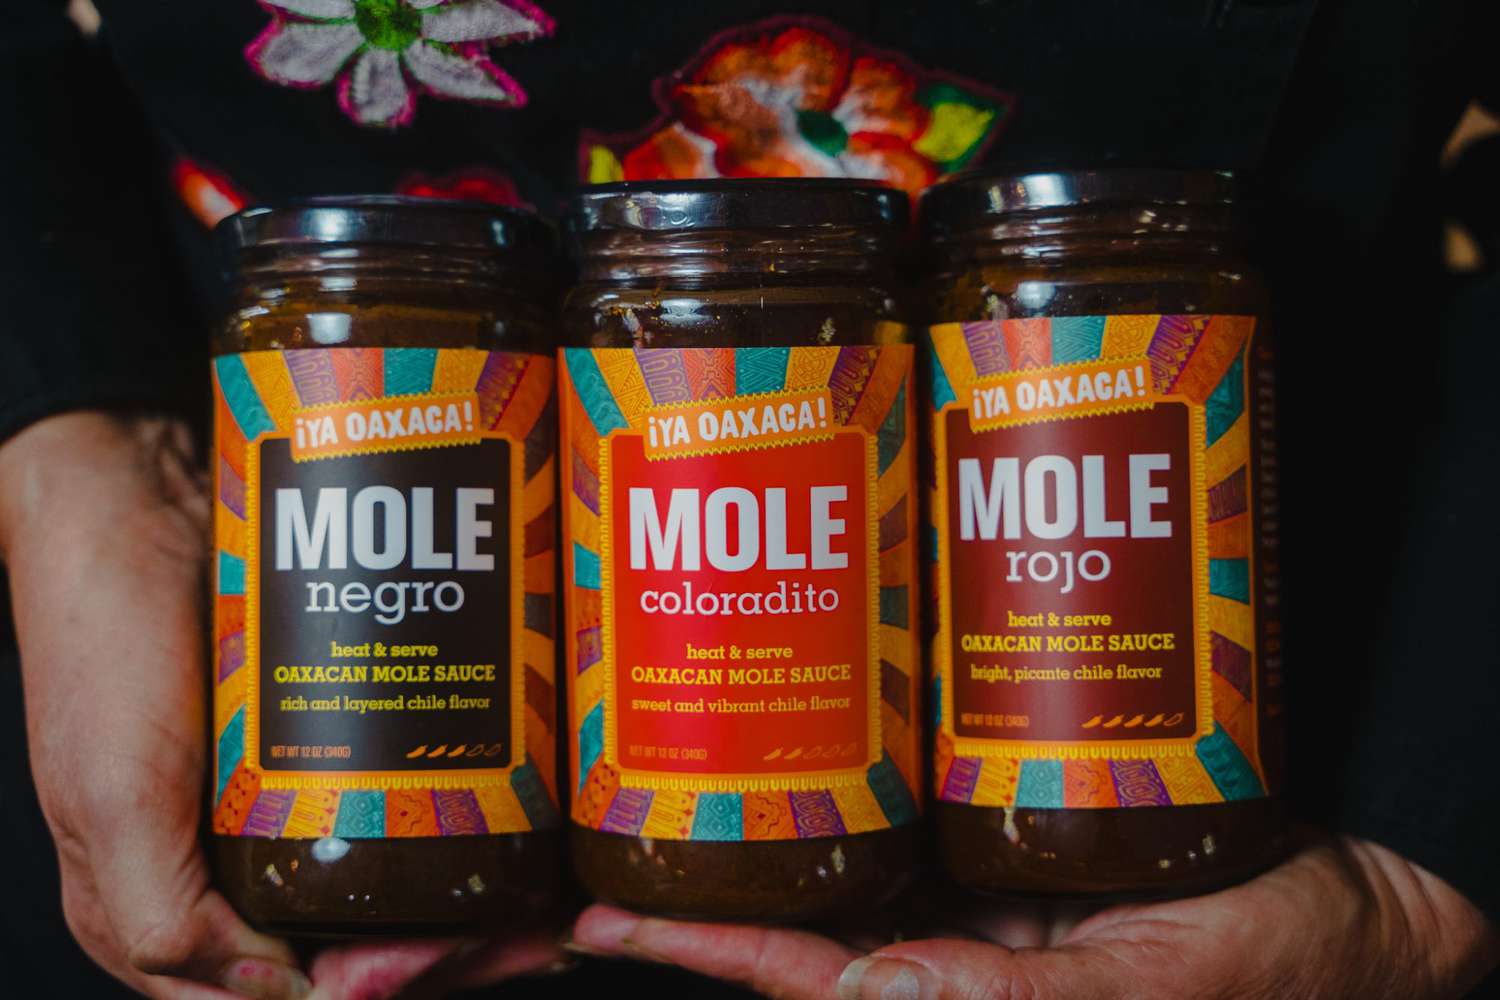 <p>Your friend who's always hosting Taco Tuesday night will love these vegan, gluten-free heat-and-serve mole sauces from famed chef Susana Trilling who has long championed Oaxacan cuisine. The three varieties—Negro, Rojo, and Coloradito—are sold individually and as a set. They're just right not only for tacos and meat, but also as a complement to fried plantains or even dipping burritos into them.</p>
                            <p>Shop Now: ¡Ya Oaxaca! Tres Moles, $24.99 for three, yaoaxaca.com.</p>
                            